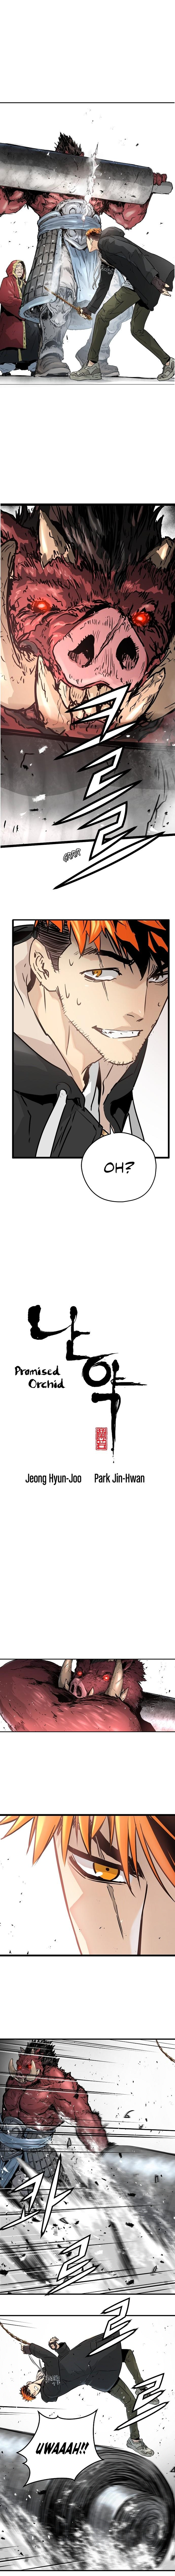 Promised Orchid - Chapter 1